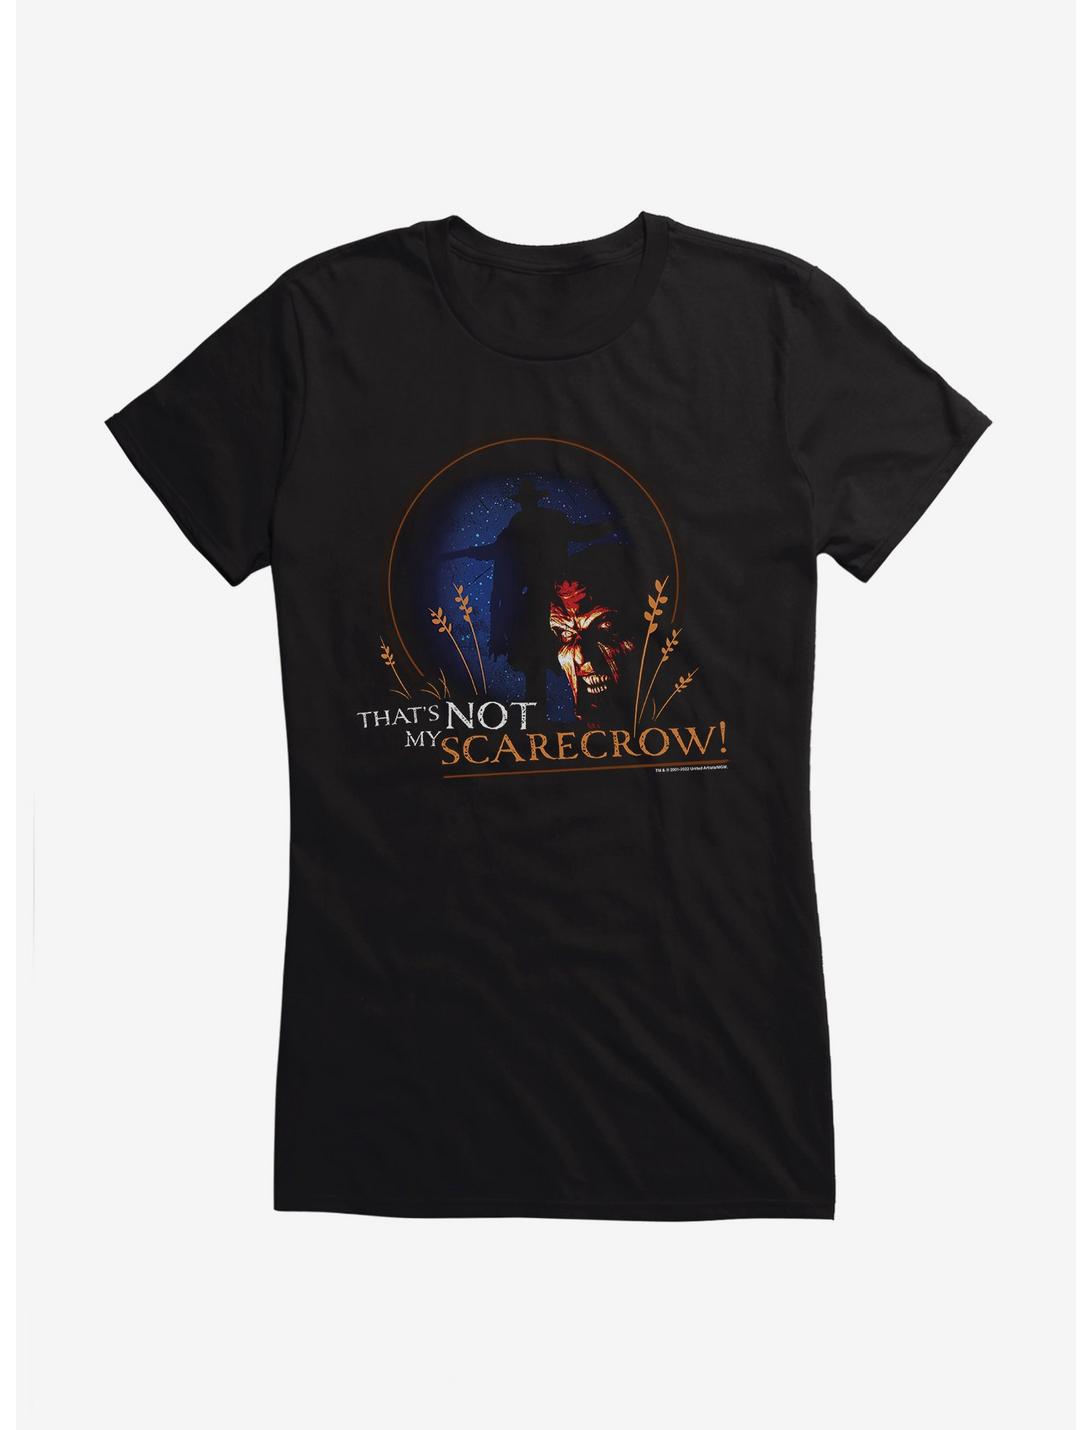 Jeepers Creepers That's Not My Scarecrow Girls T-Shirt, BLACK, hi-res